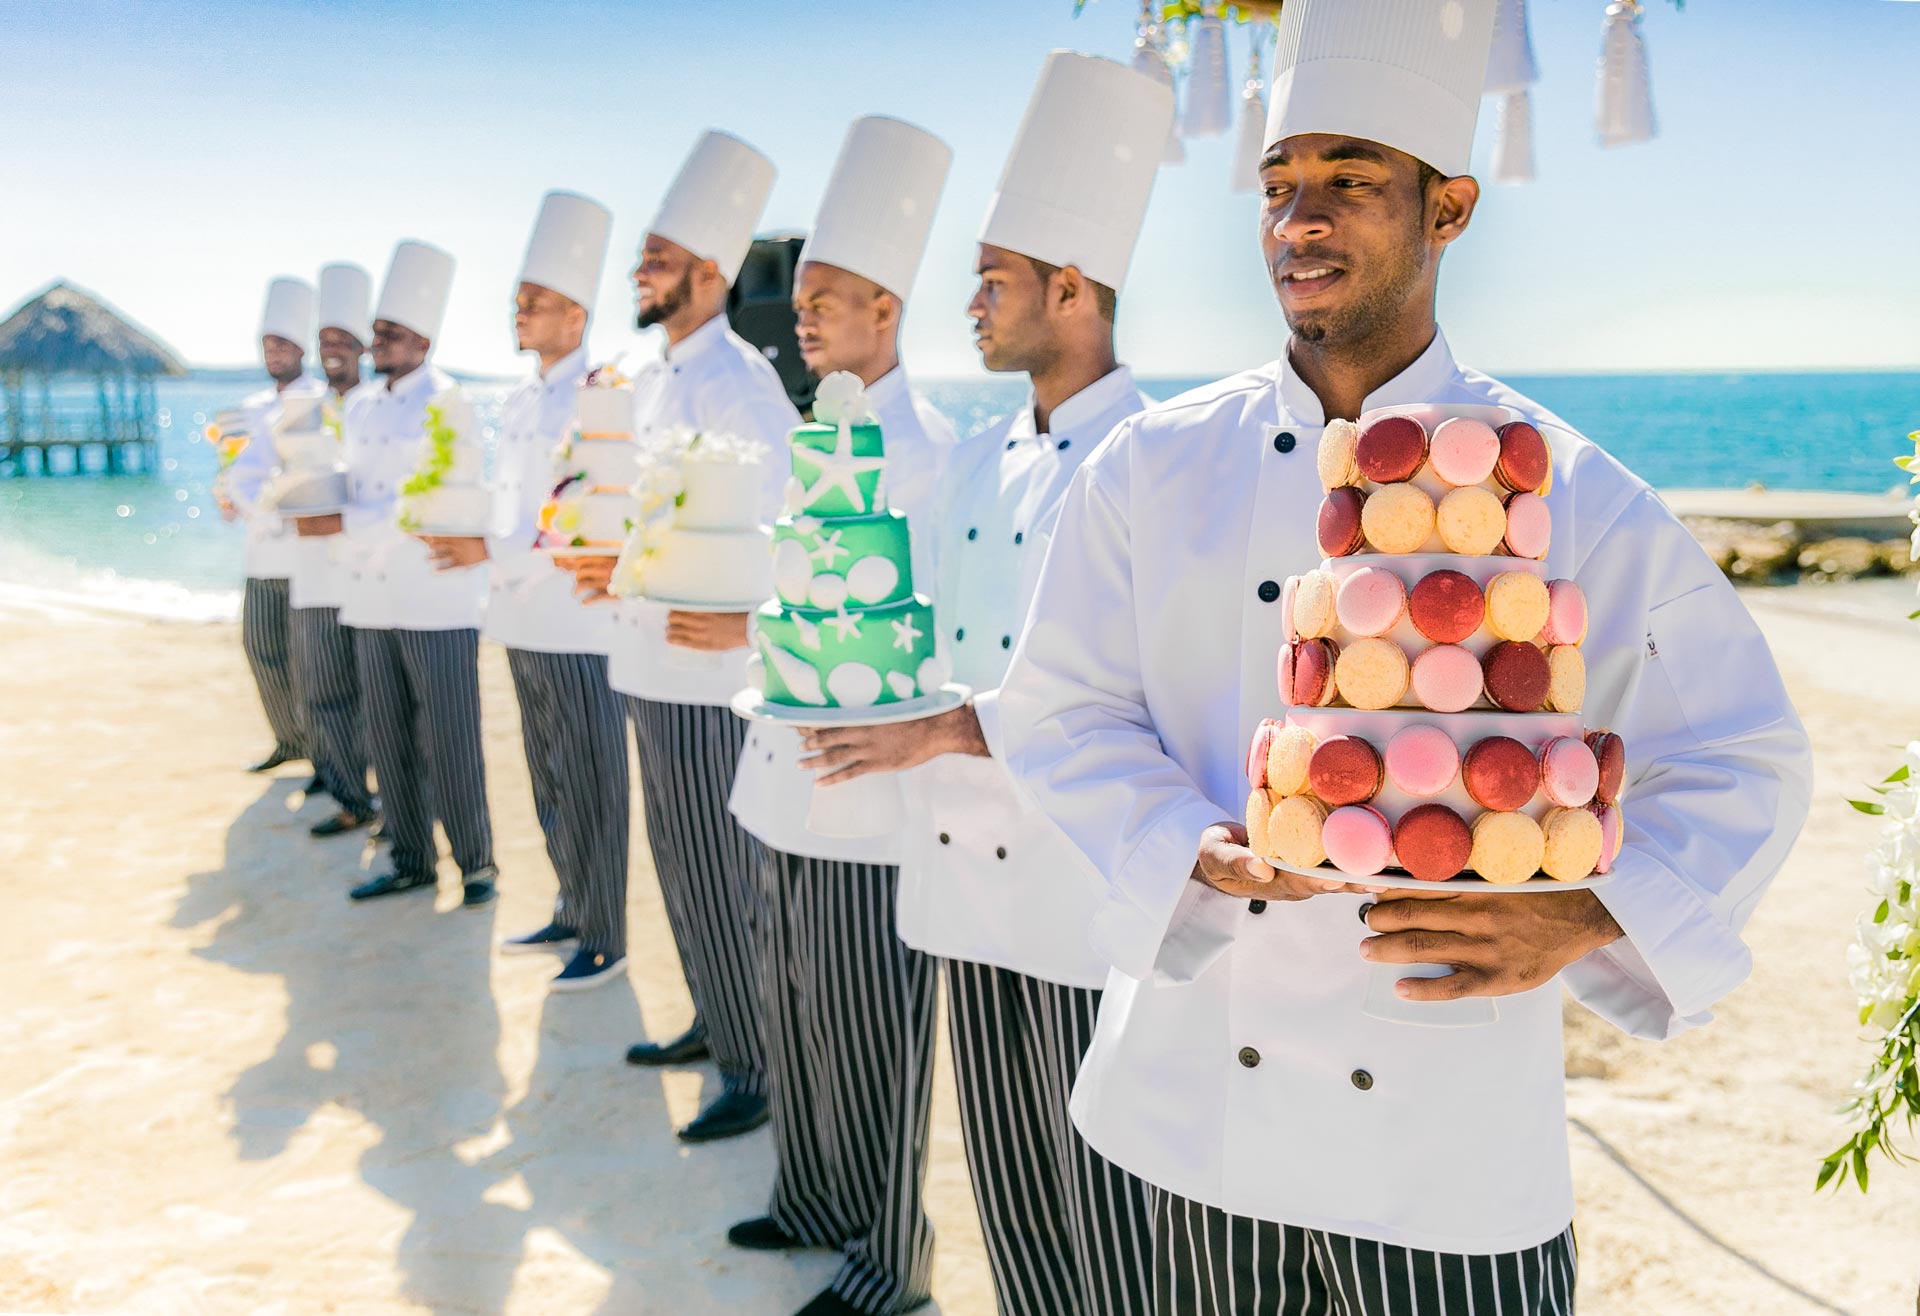 Row of chefs with cakes